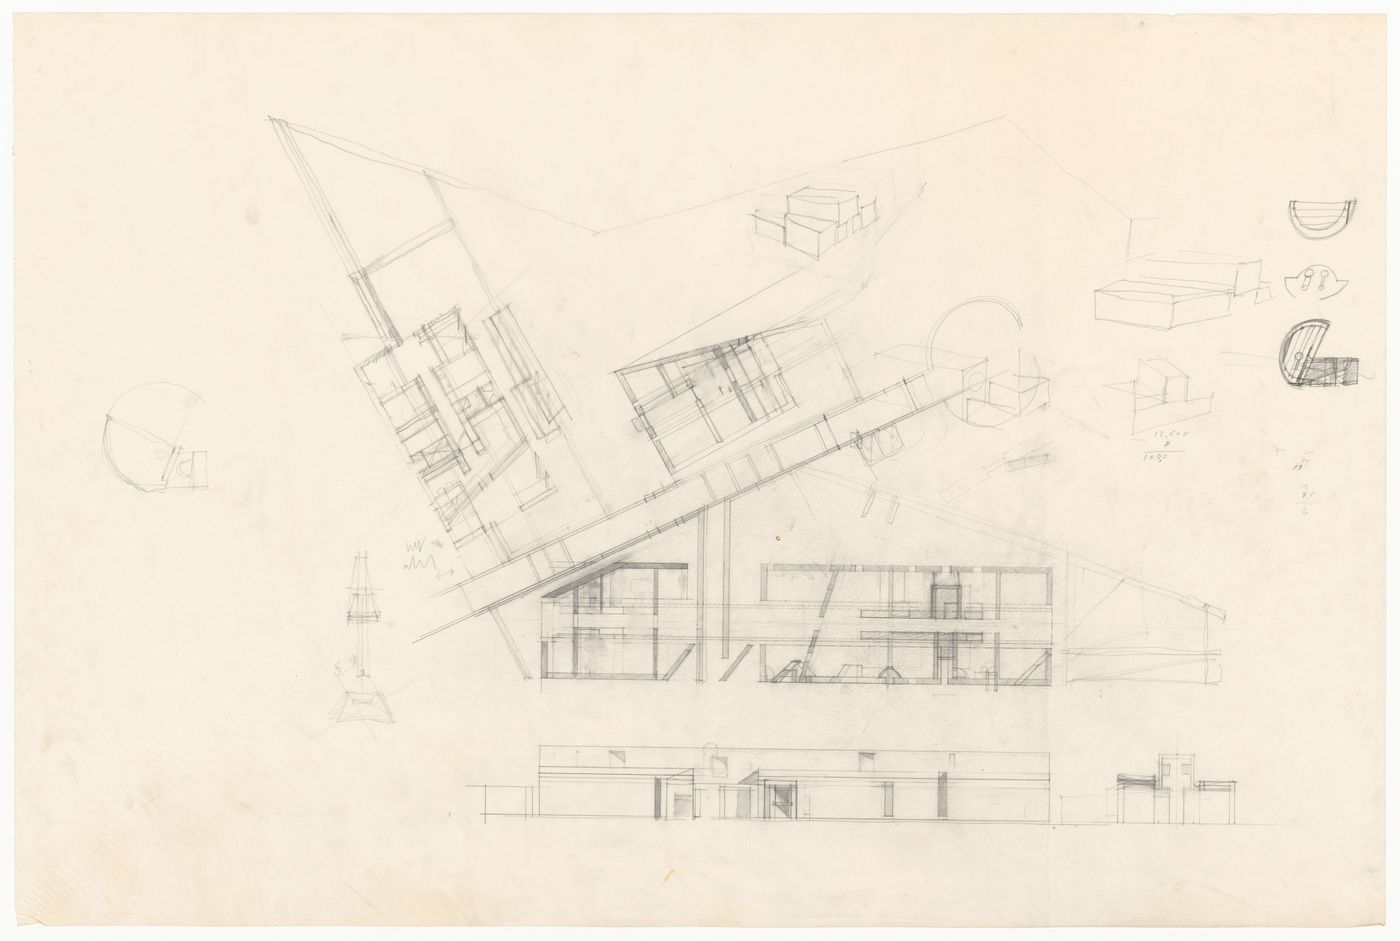 Elevations, plan, and sketches for Casa Tabanelli, Stintino, Italy